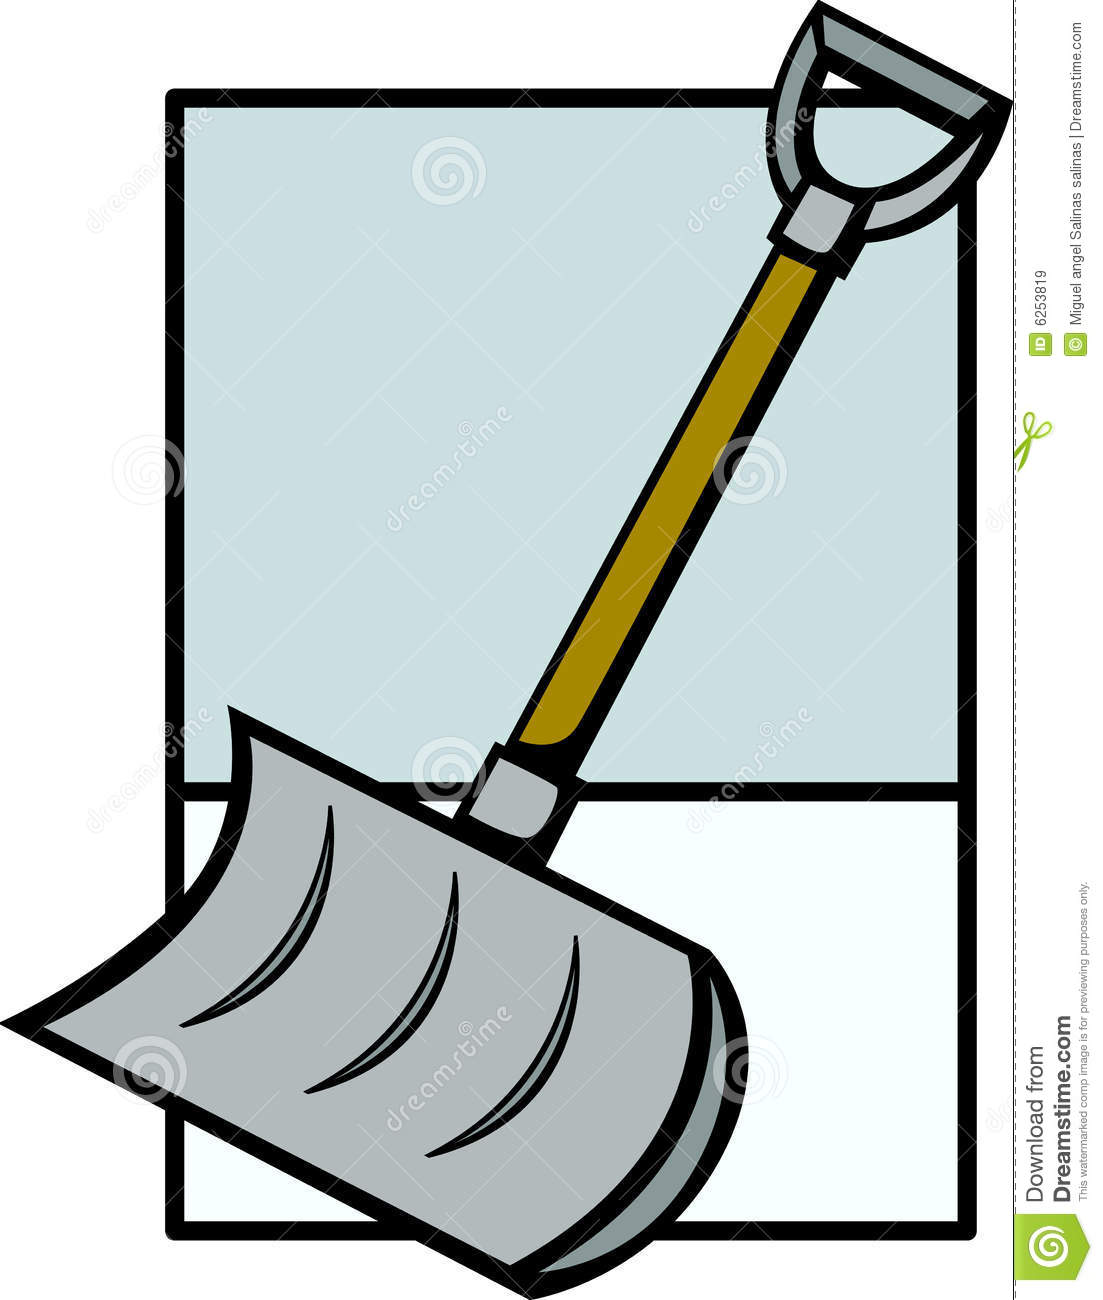 Snow Shovel Vector Illustration Royalty Free Stock Images   Image